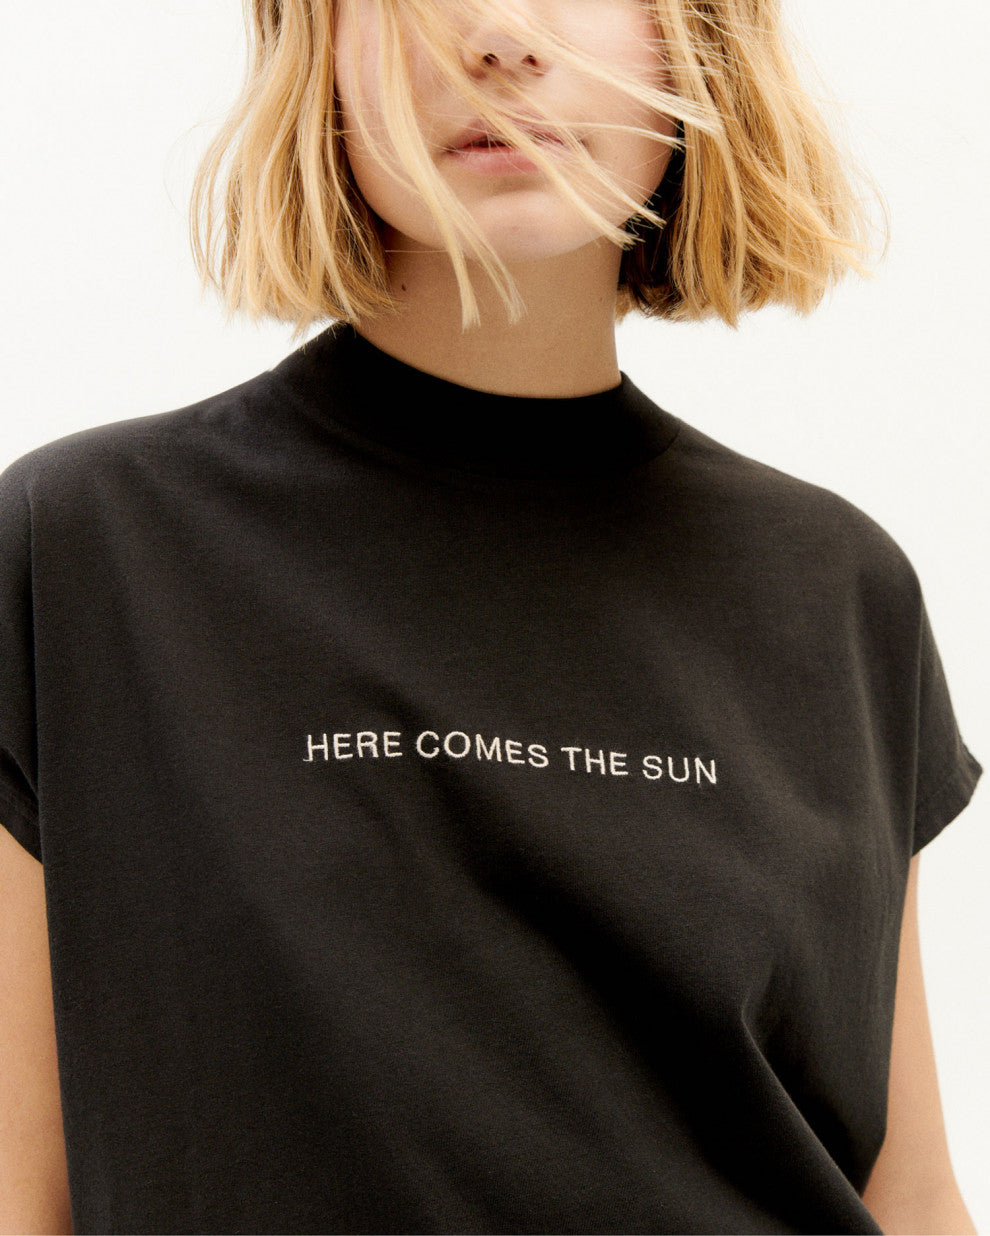 Here comes the sun- T-Shirt Black